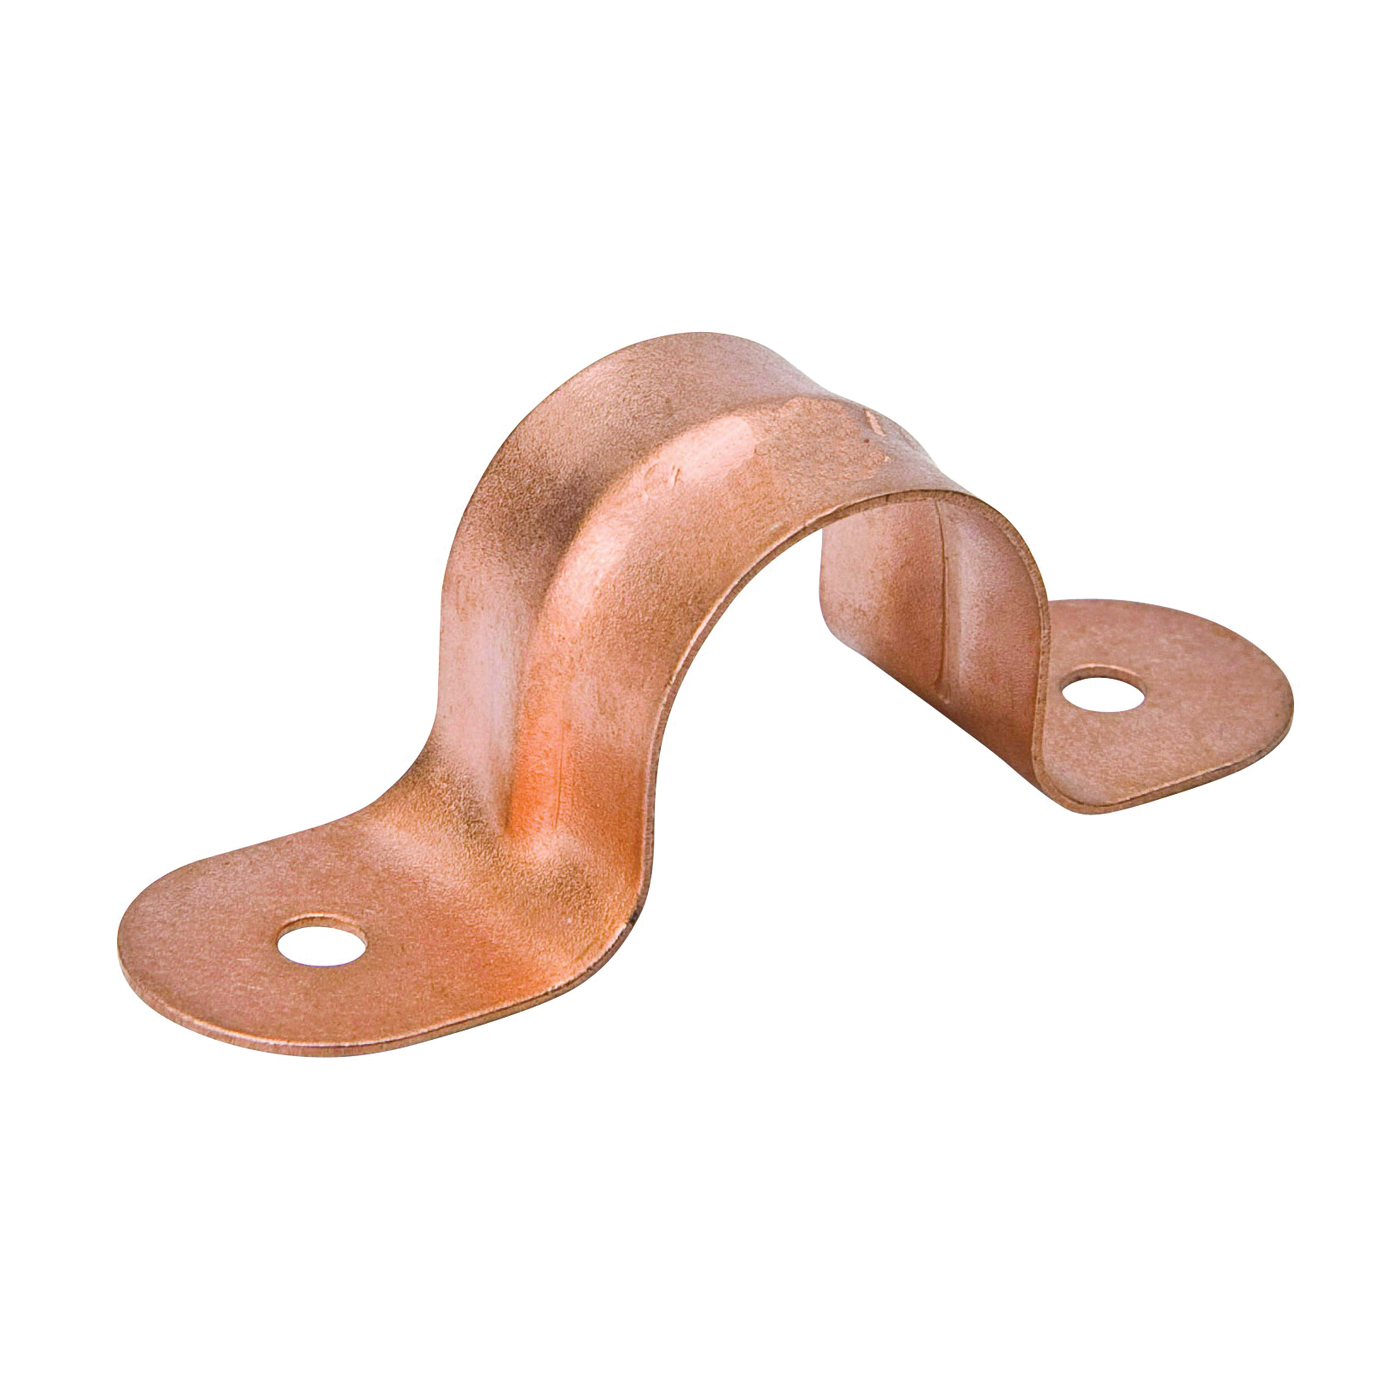 C13-038HC Pipe Strap, 3/8 in Opening, Steel